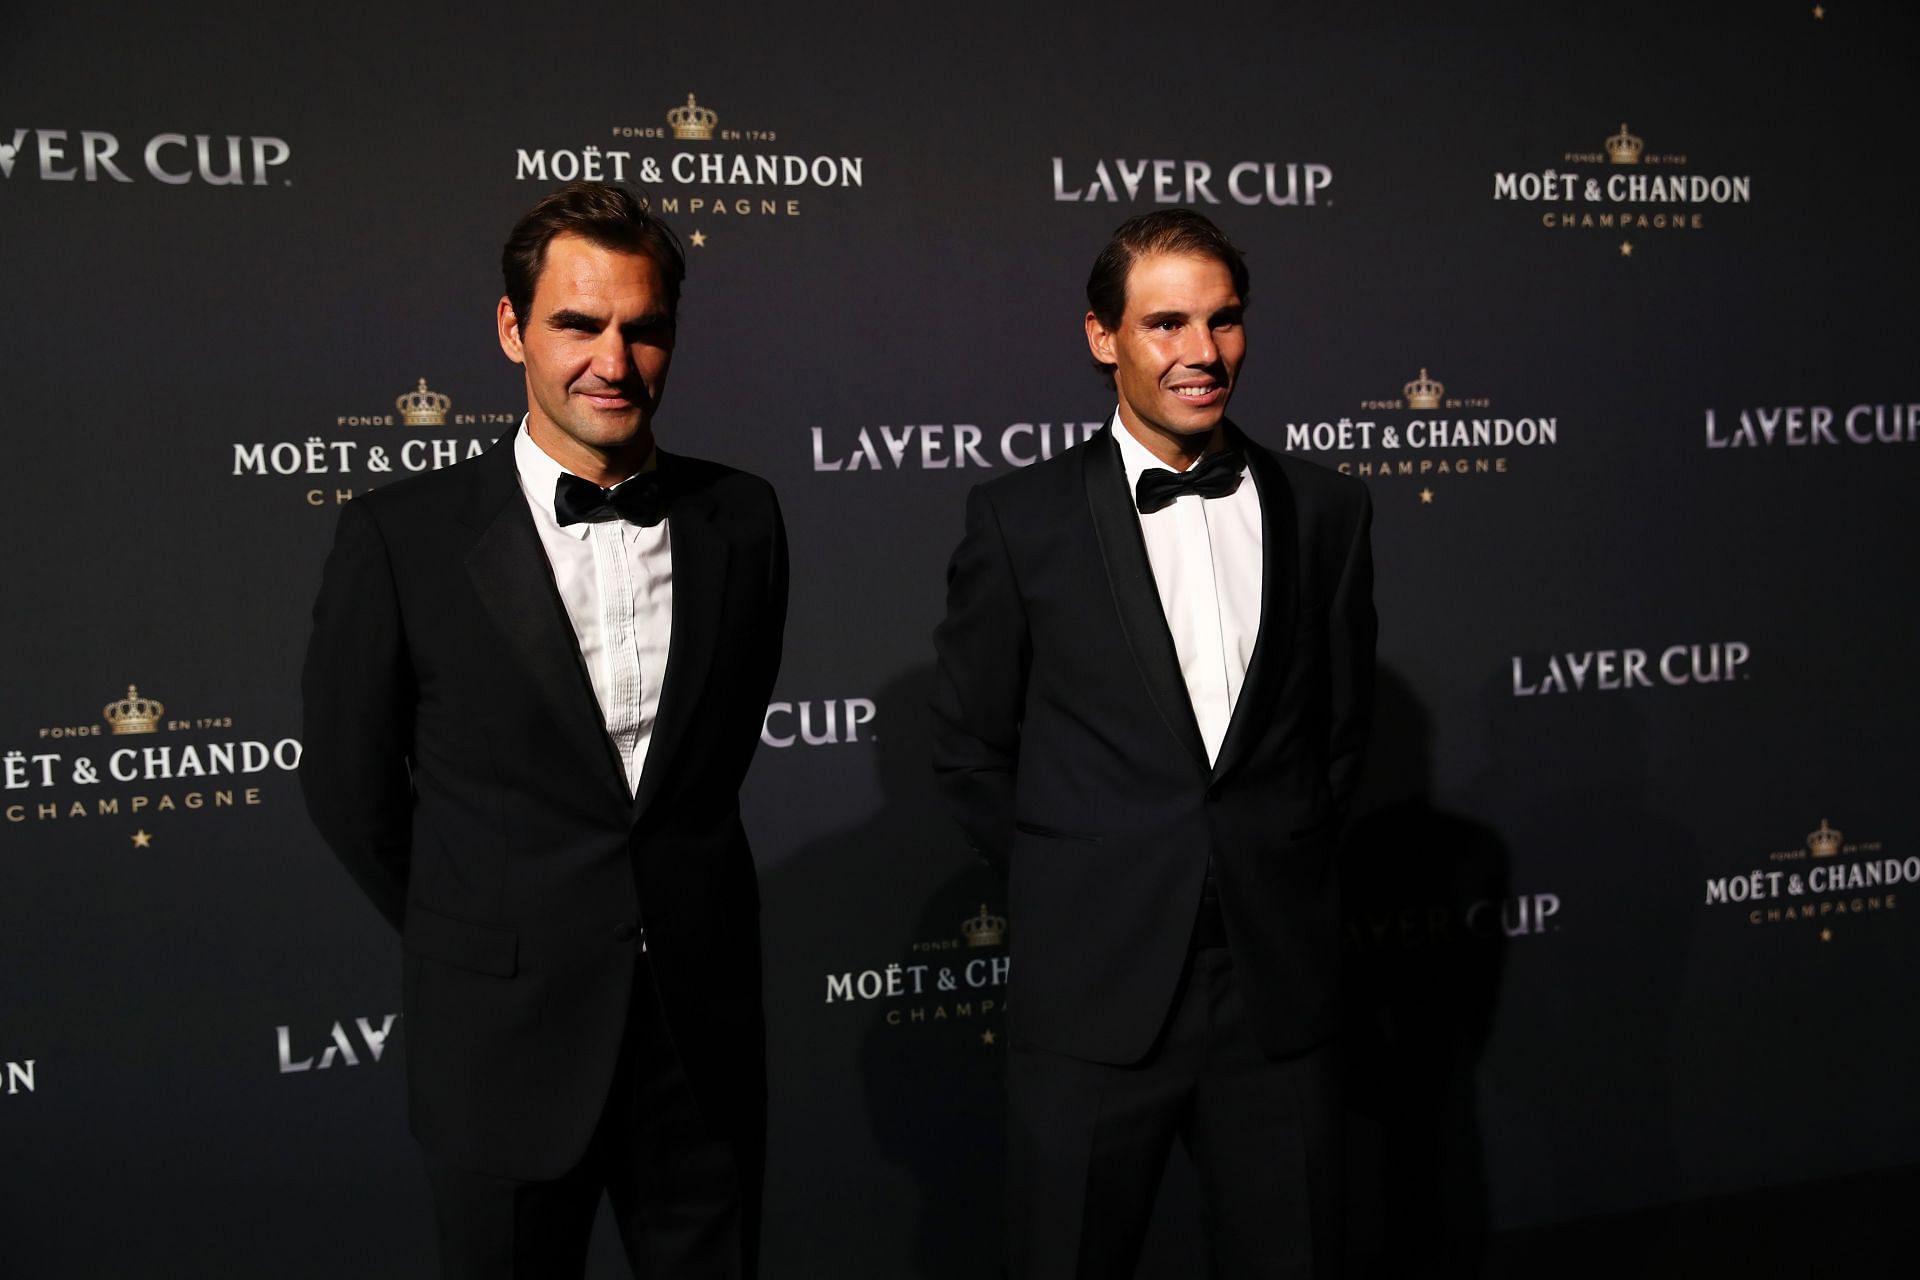 It has been almost an entire year since Roger Federer and Rafael Nadal played in the same event